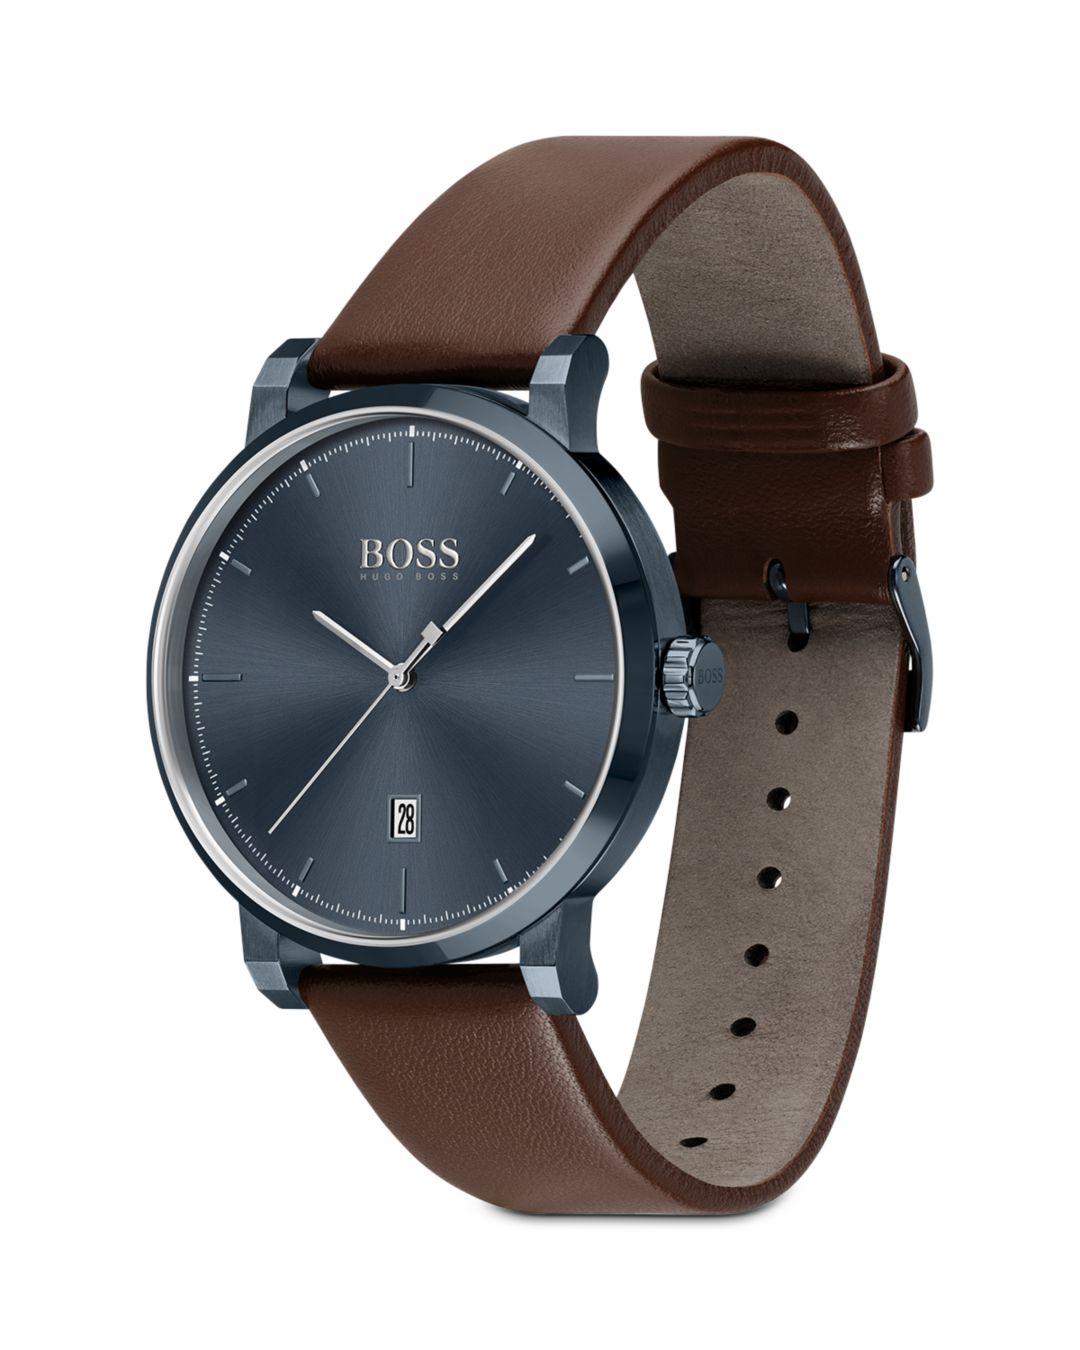 BOSS by HUGO BOSS Confidence Brown Leather Strap Watch 42mm for Men - Lyst